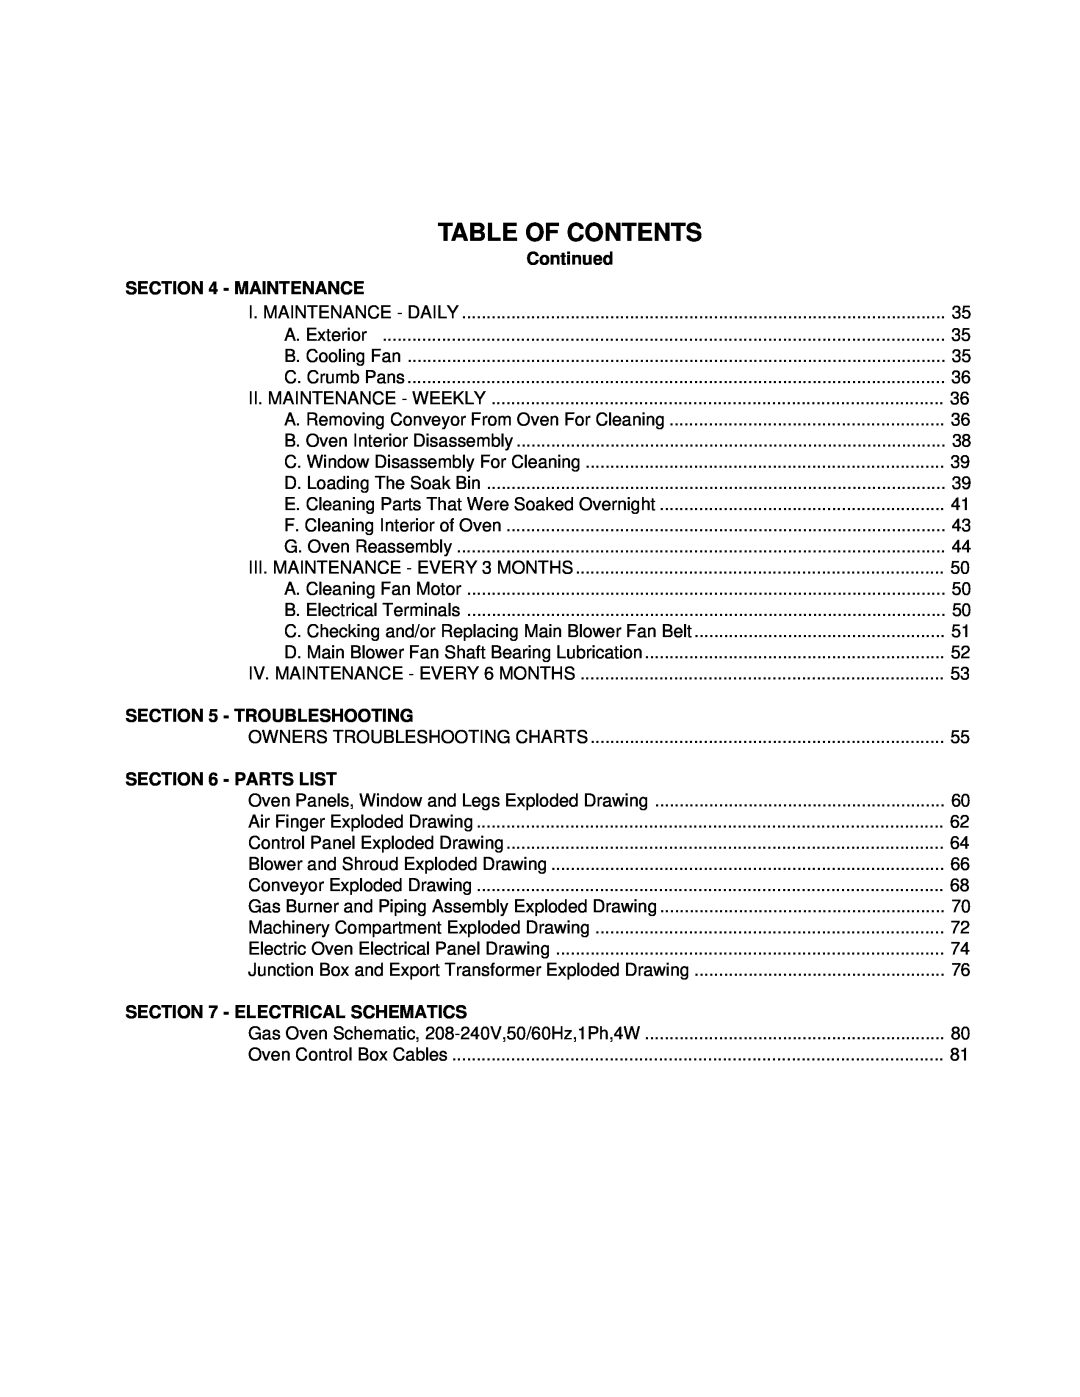 Middleby Marshall PS200-R68 Table Of Contents, Continued, Maintenance, Troubleshooting, Parts List, Electrical Schematics 